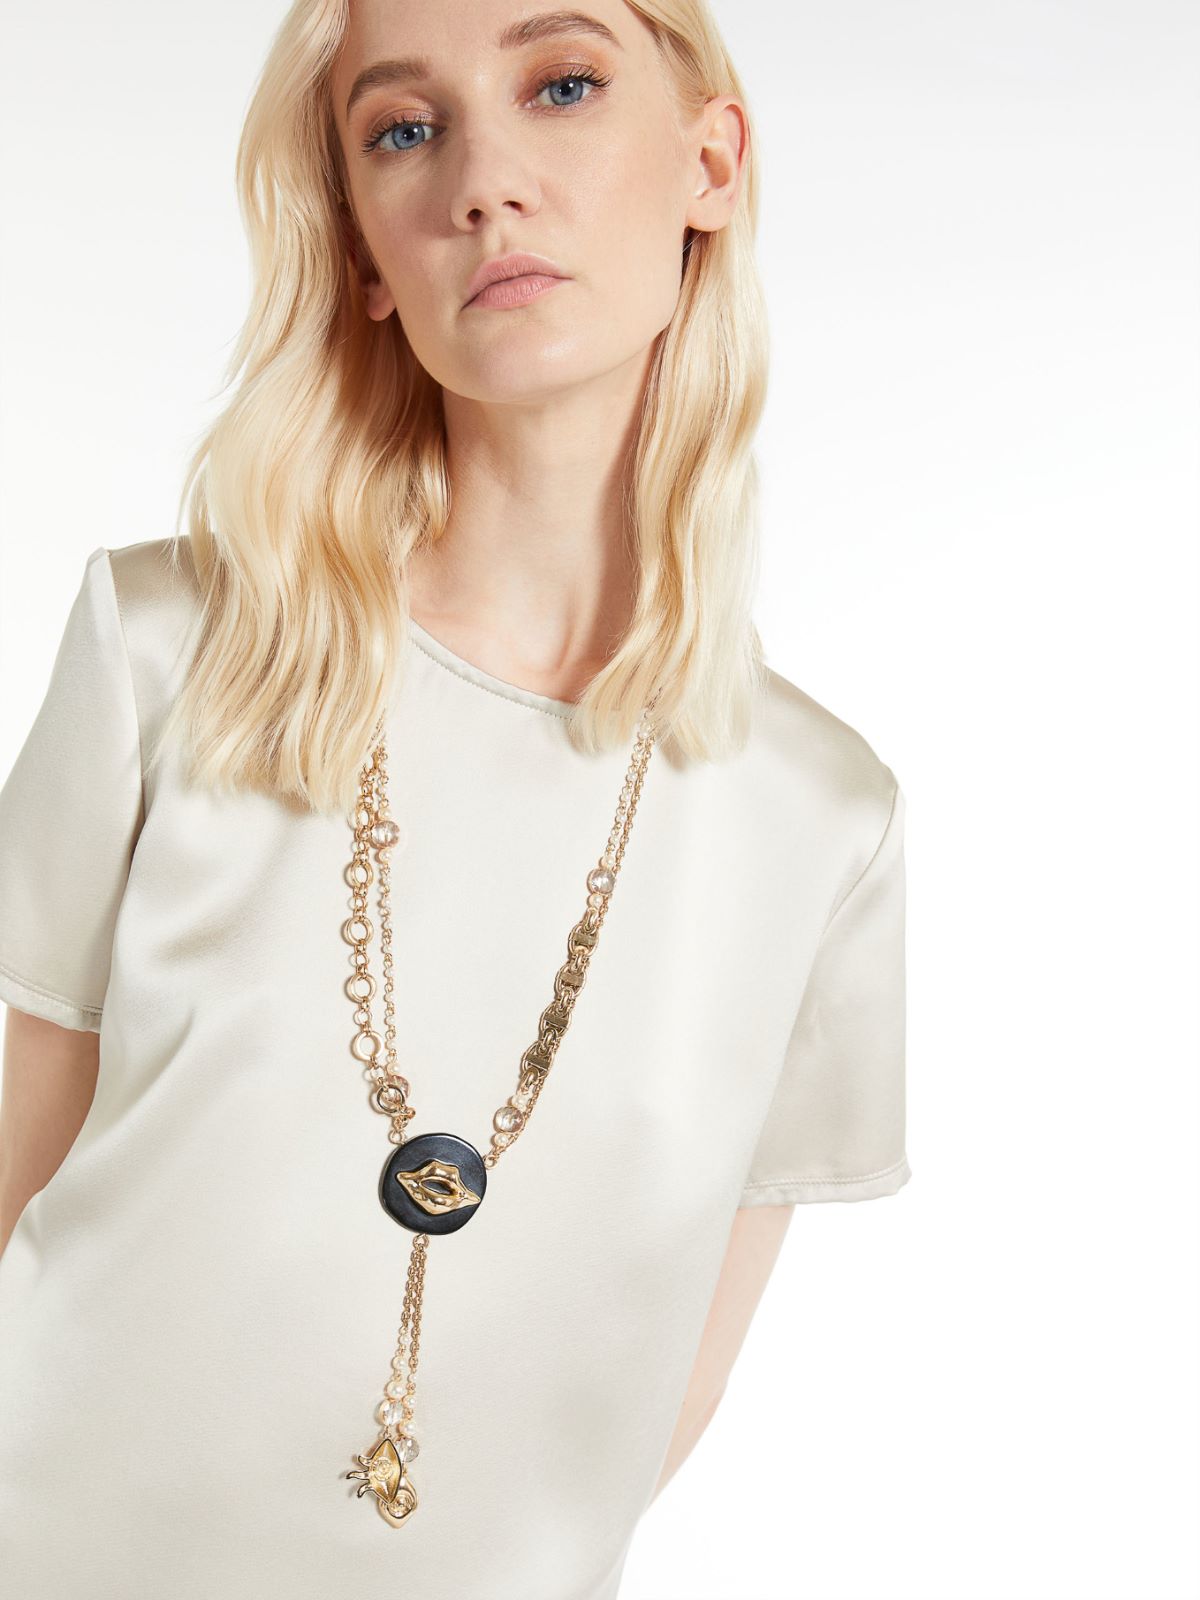 Pendant-adorned metal necklace - GOLD - Weekend Max Mara - 5